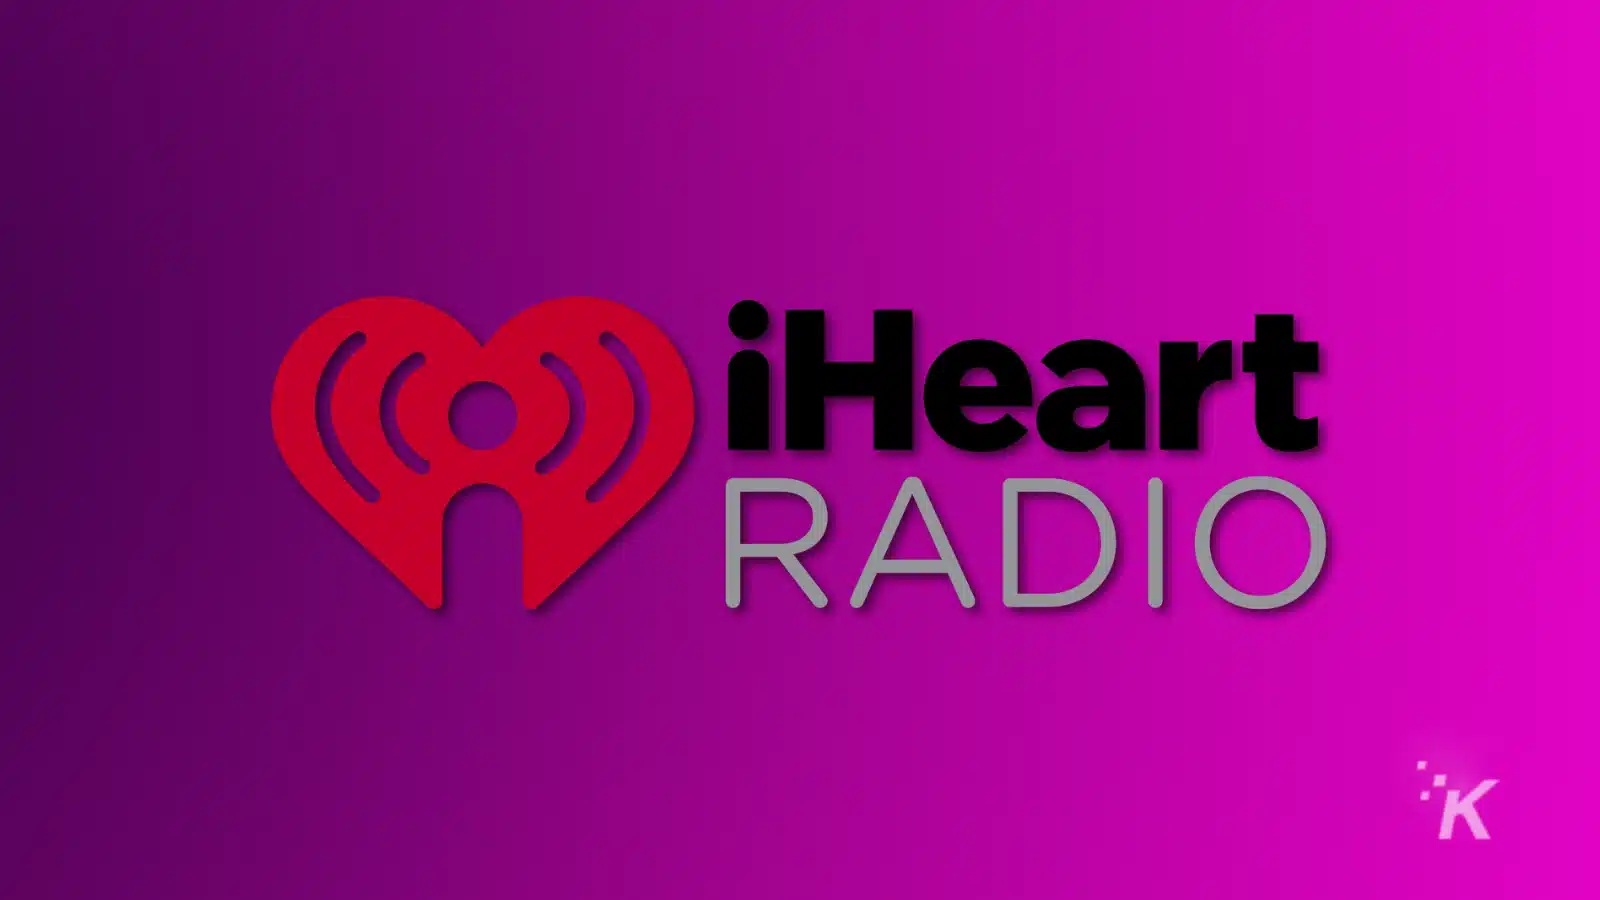 Iheart logo and text on a purple background